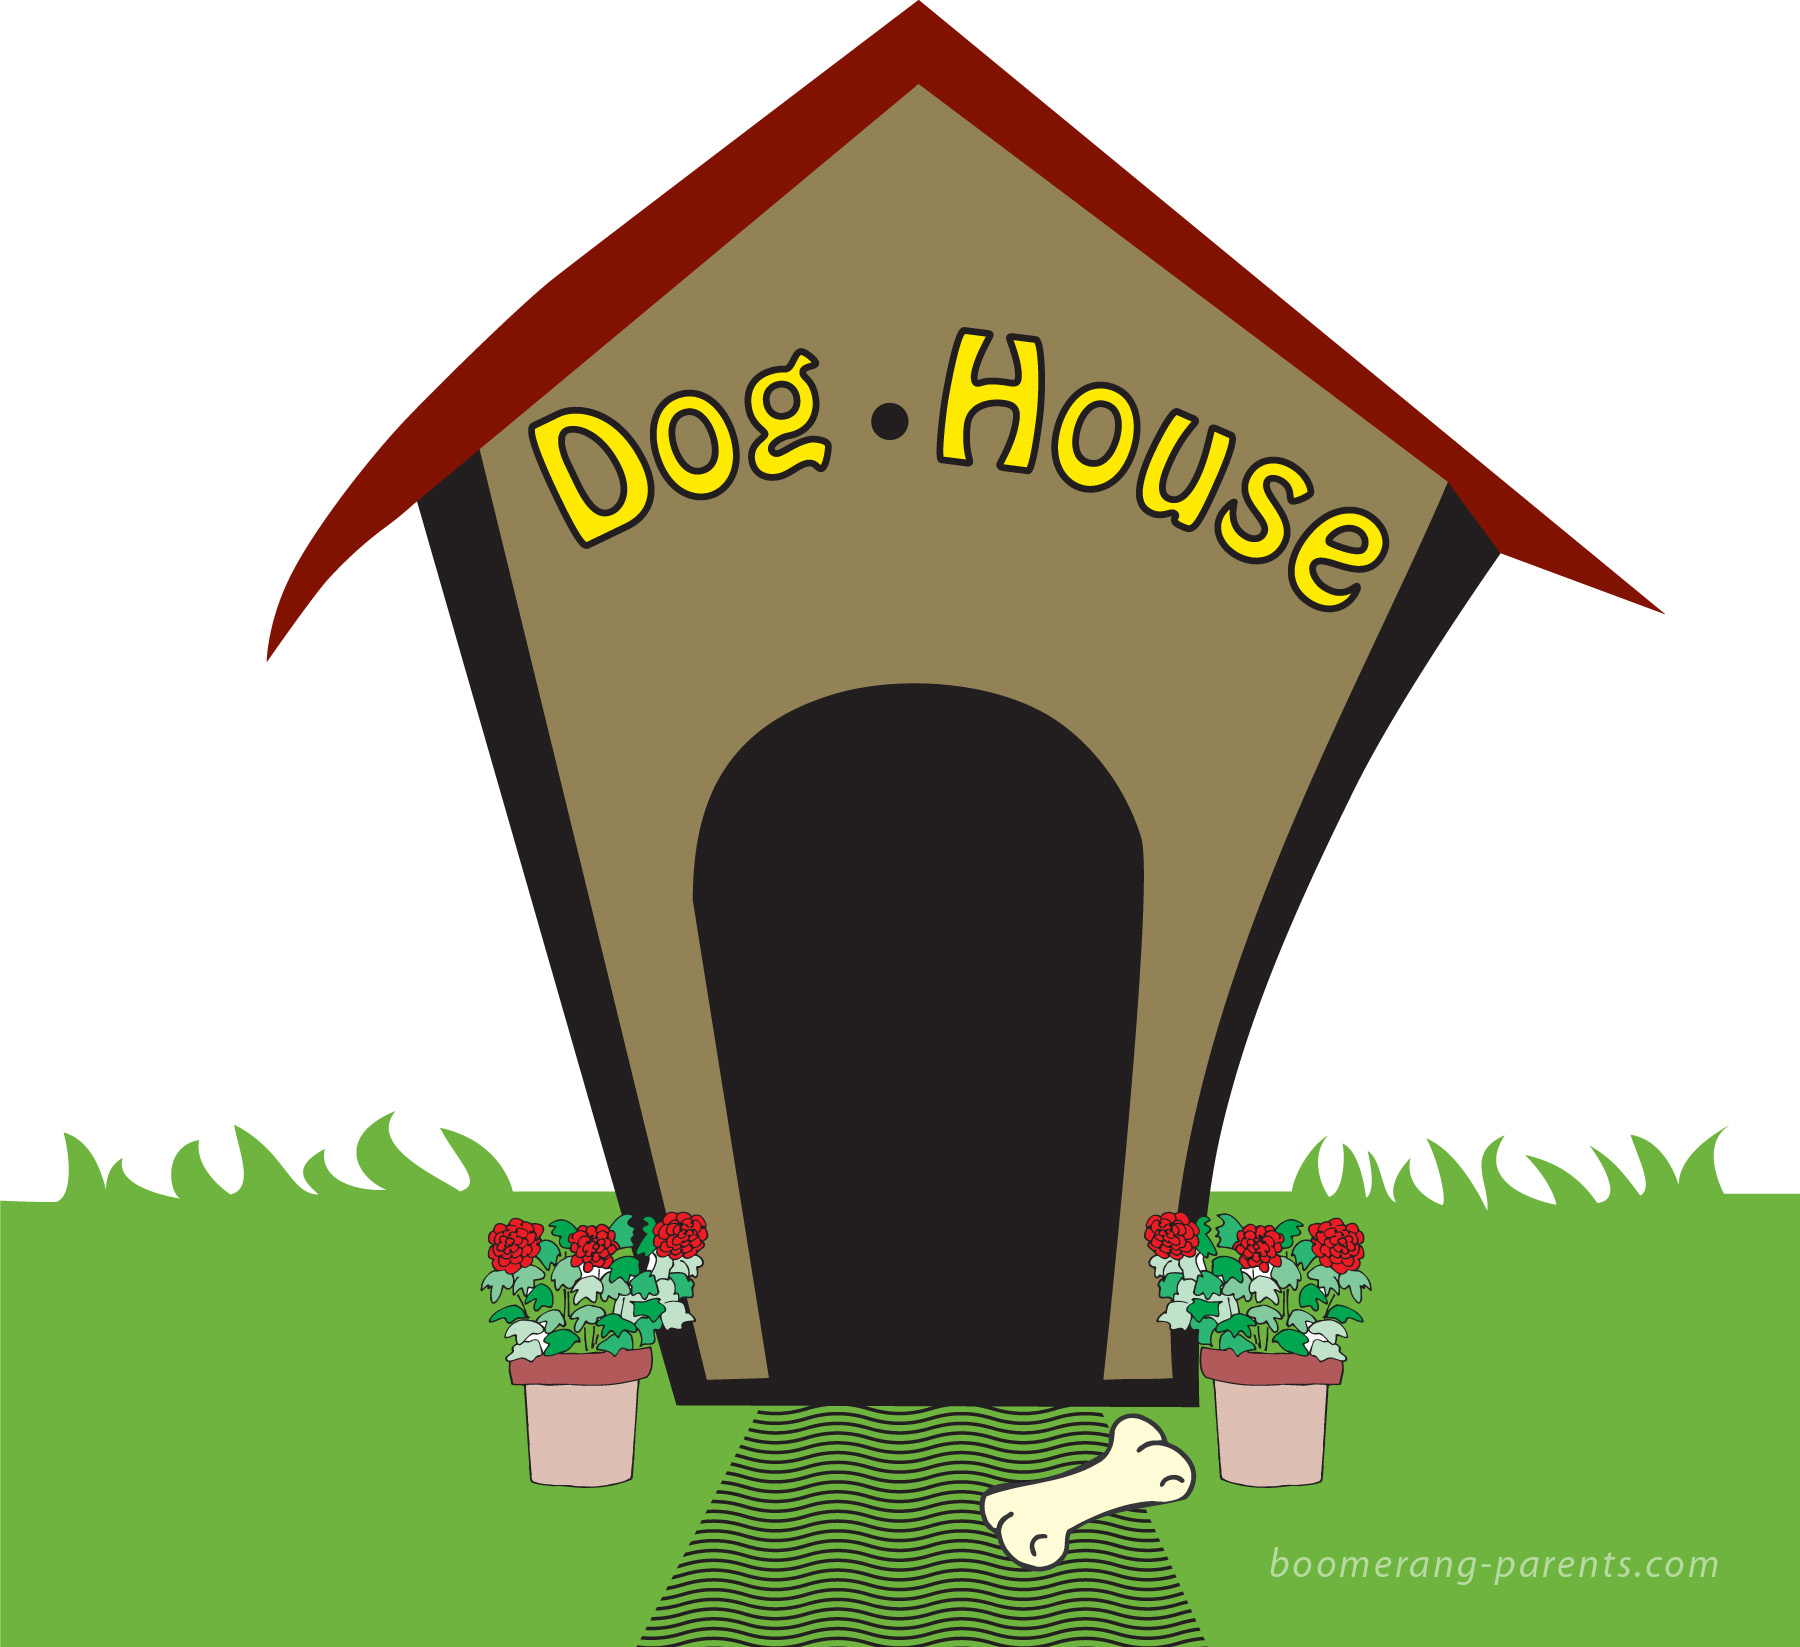 Doghouse demo the dog house. In the Doghouse идиома. Грузовик the Dog House. Занос в the Dog House. It is by Doghouse.